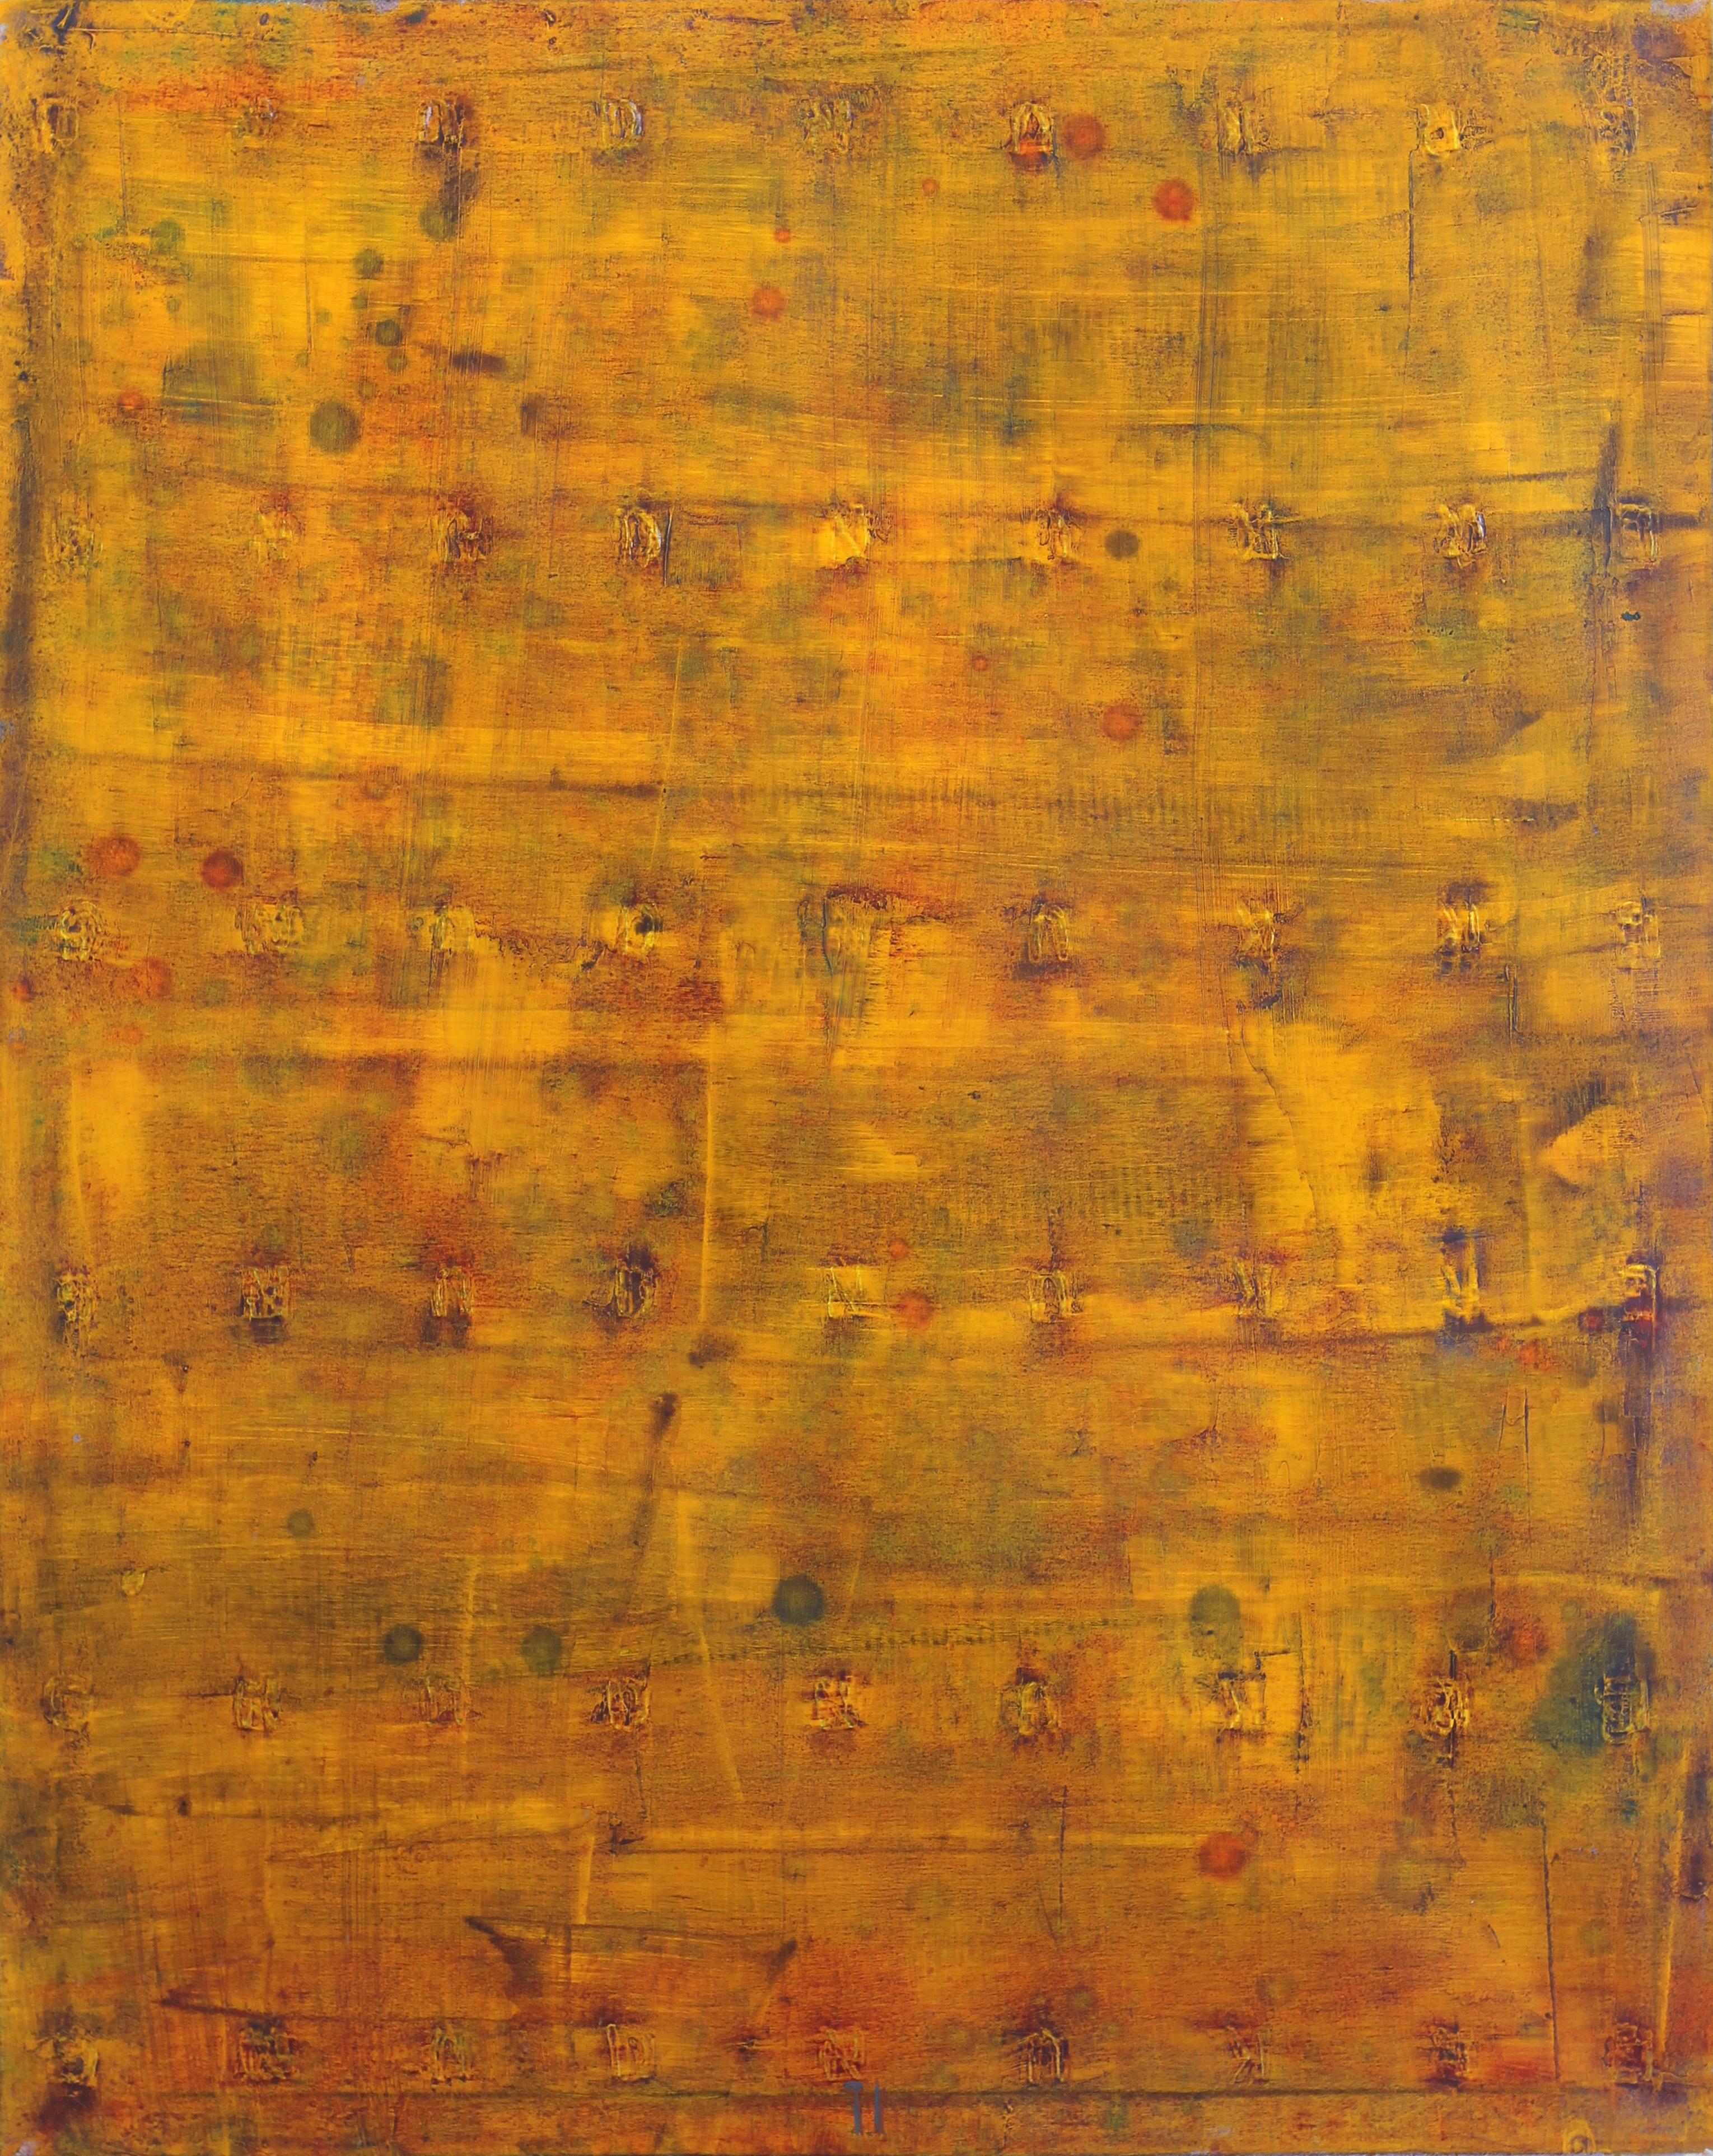 AWH 191 - Original Abstract Expressionist Yellow Colorfield Oil Painting - Mixed Media Art by Bernhard Zimmer